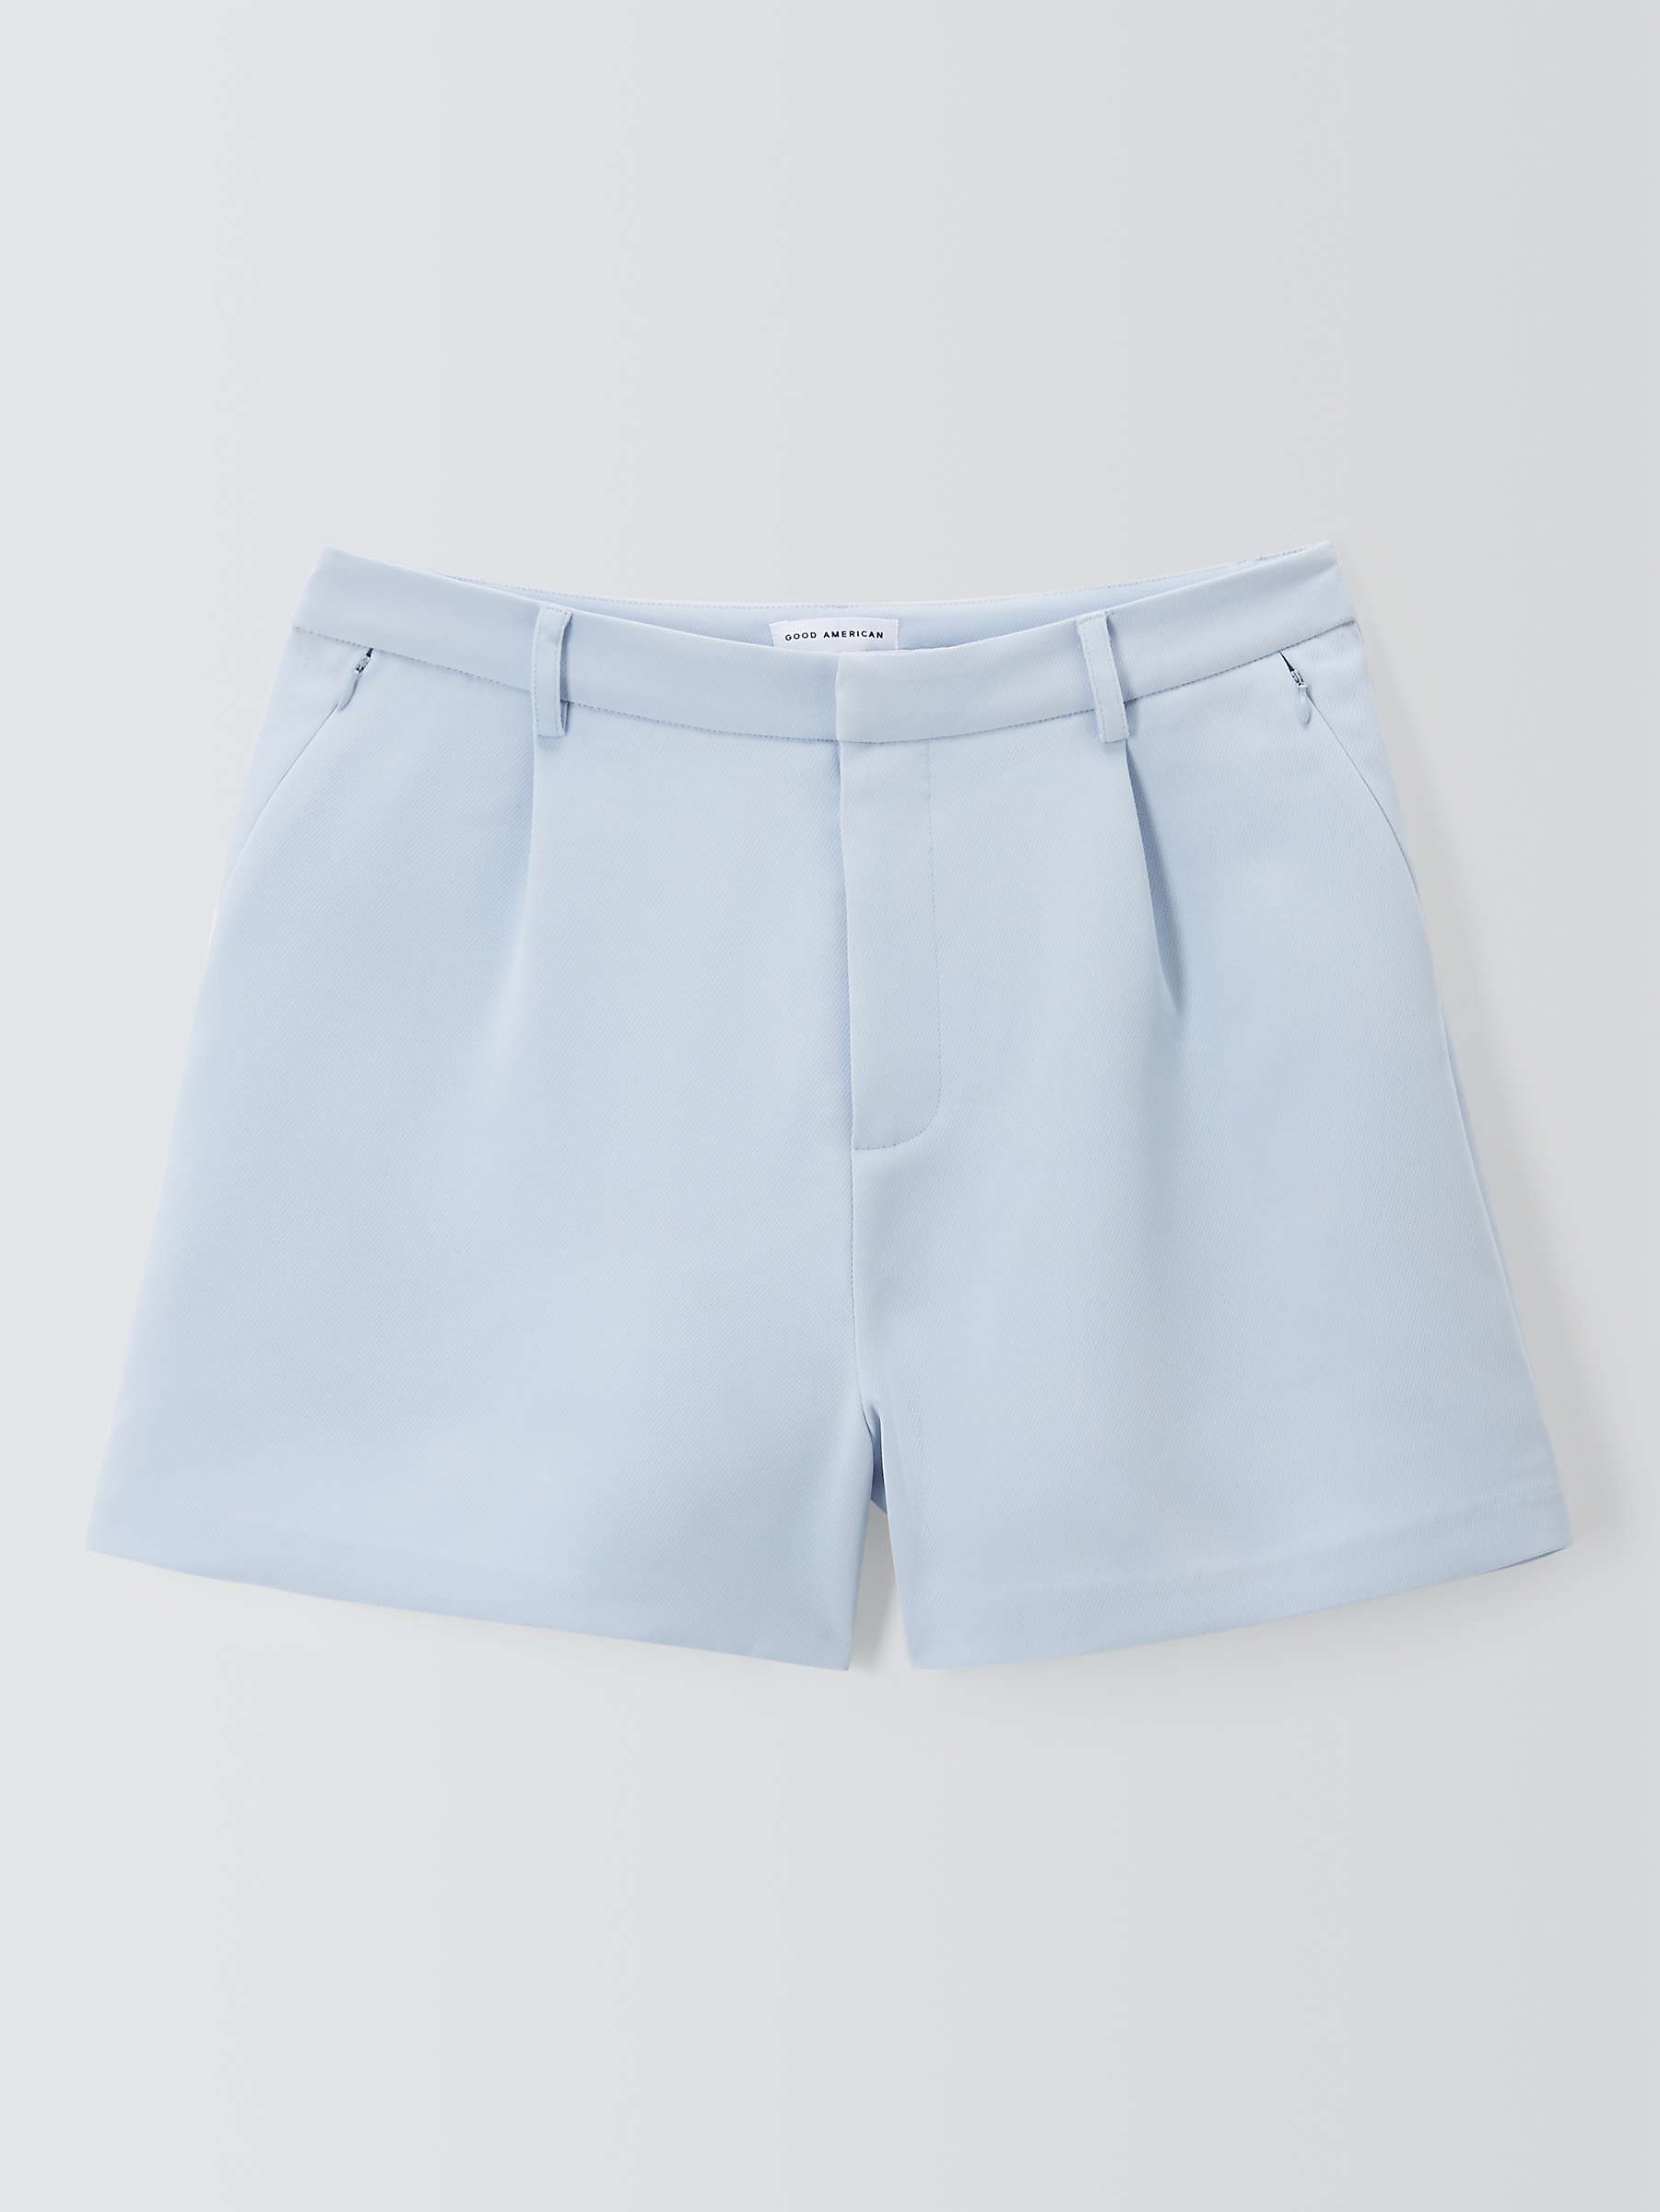 Buy Good American Luxe Shorts, Glass Online at johnlewis.com